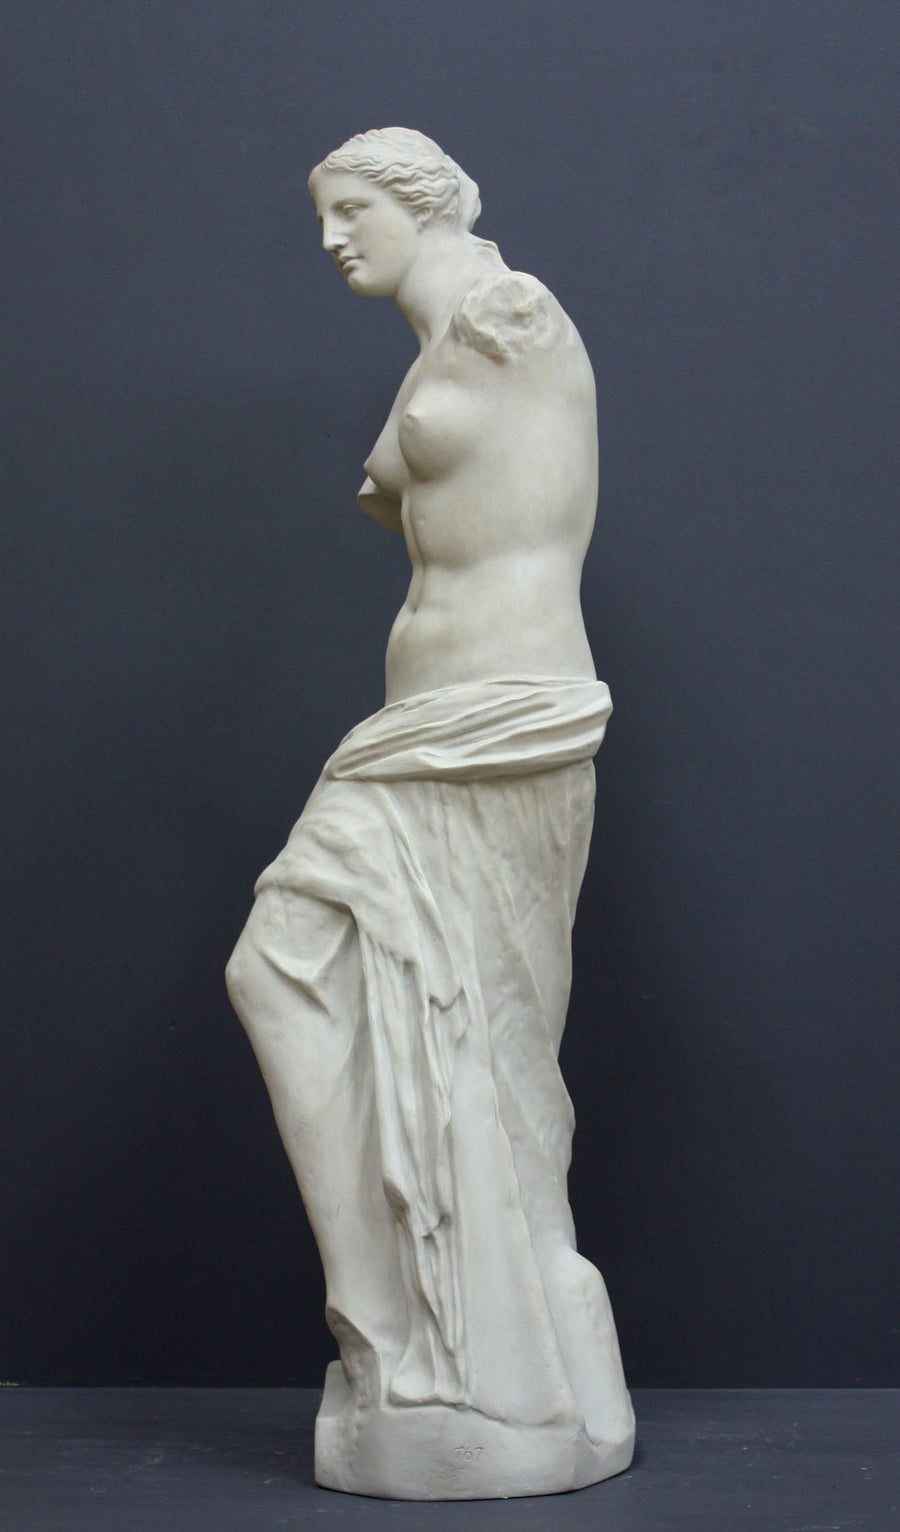 Photo of plaster cast sculpture reproduction of Venus de Melo, side view, on a grey background